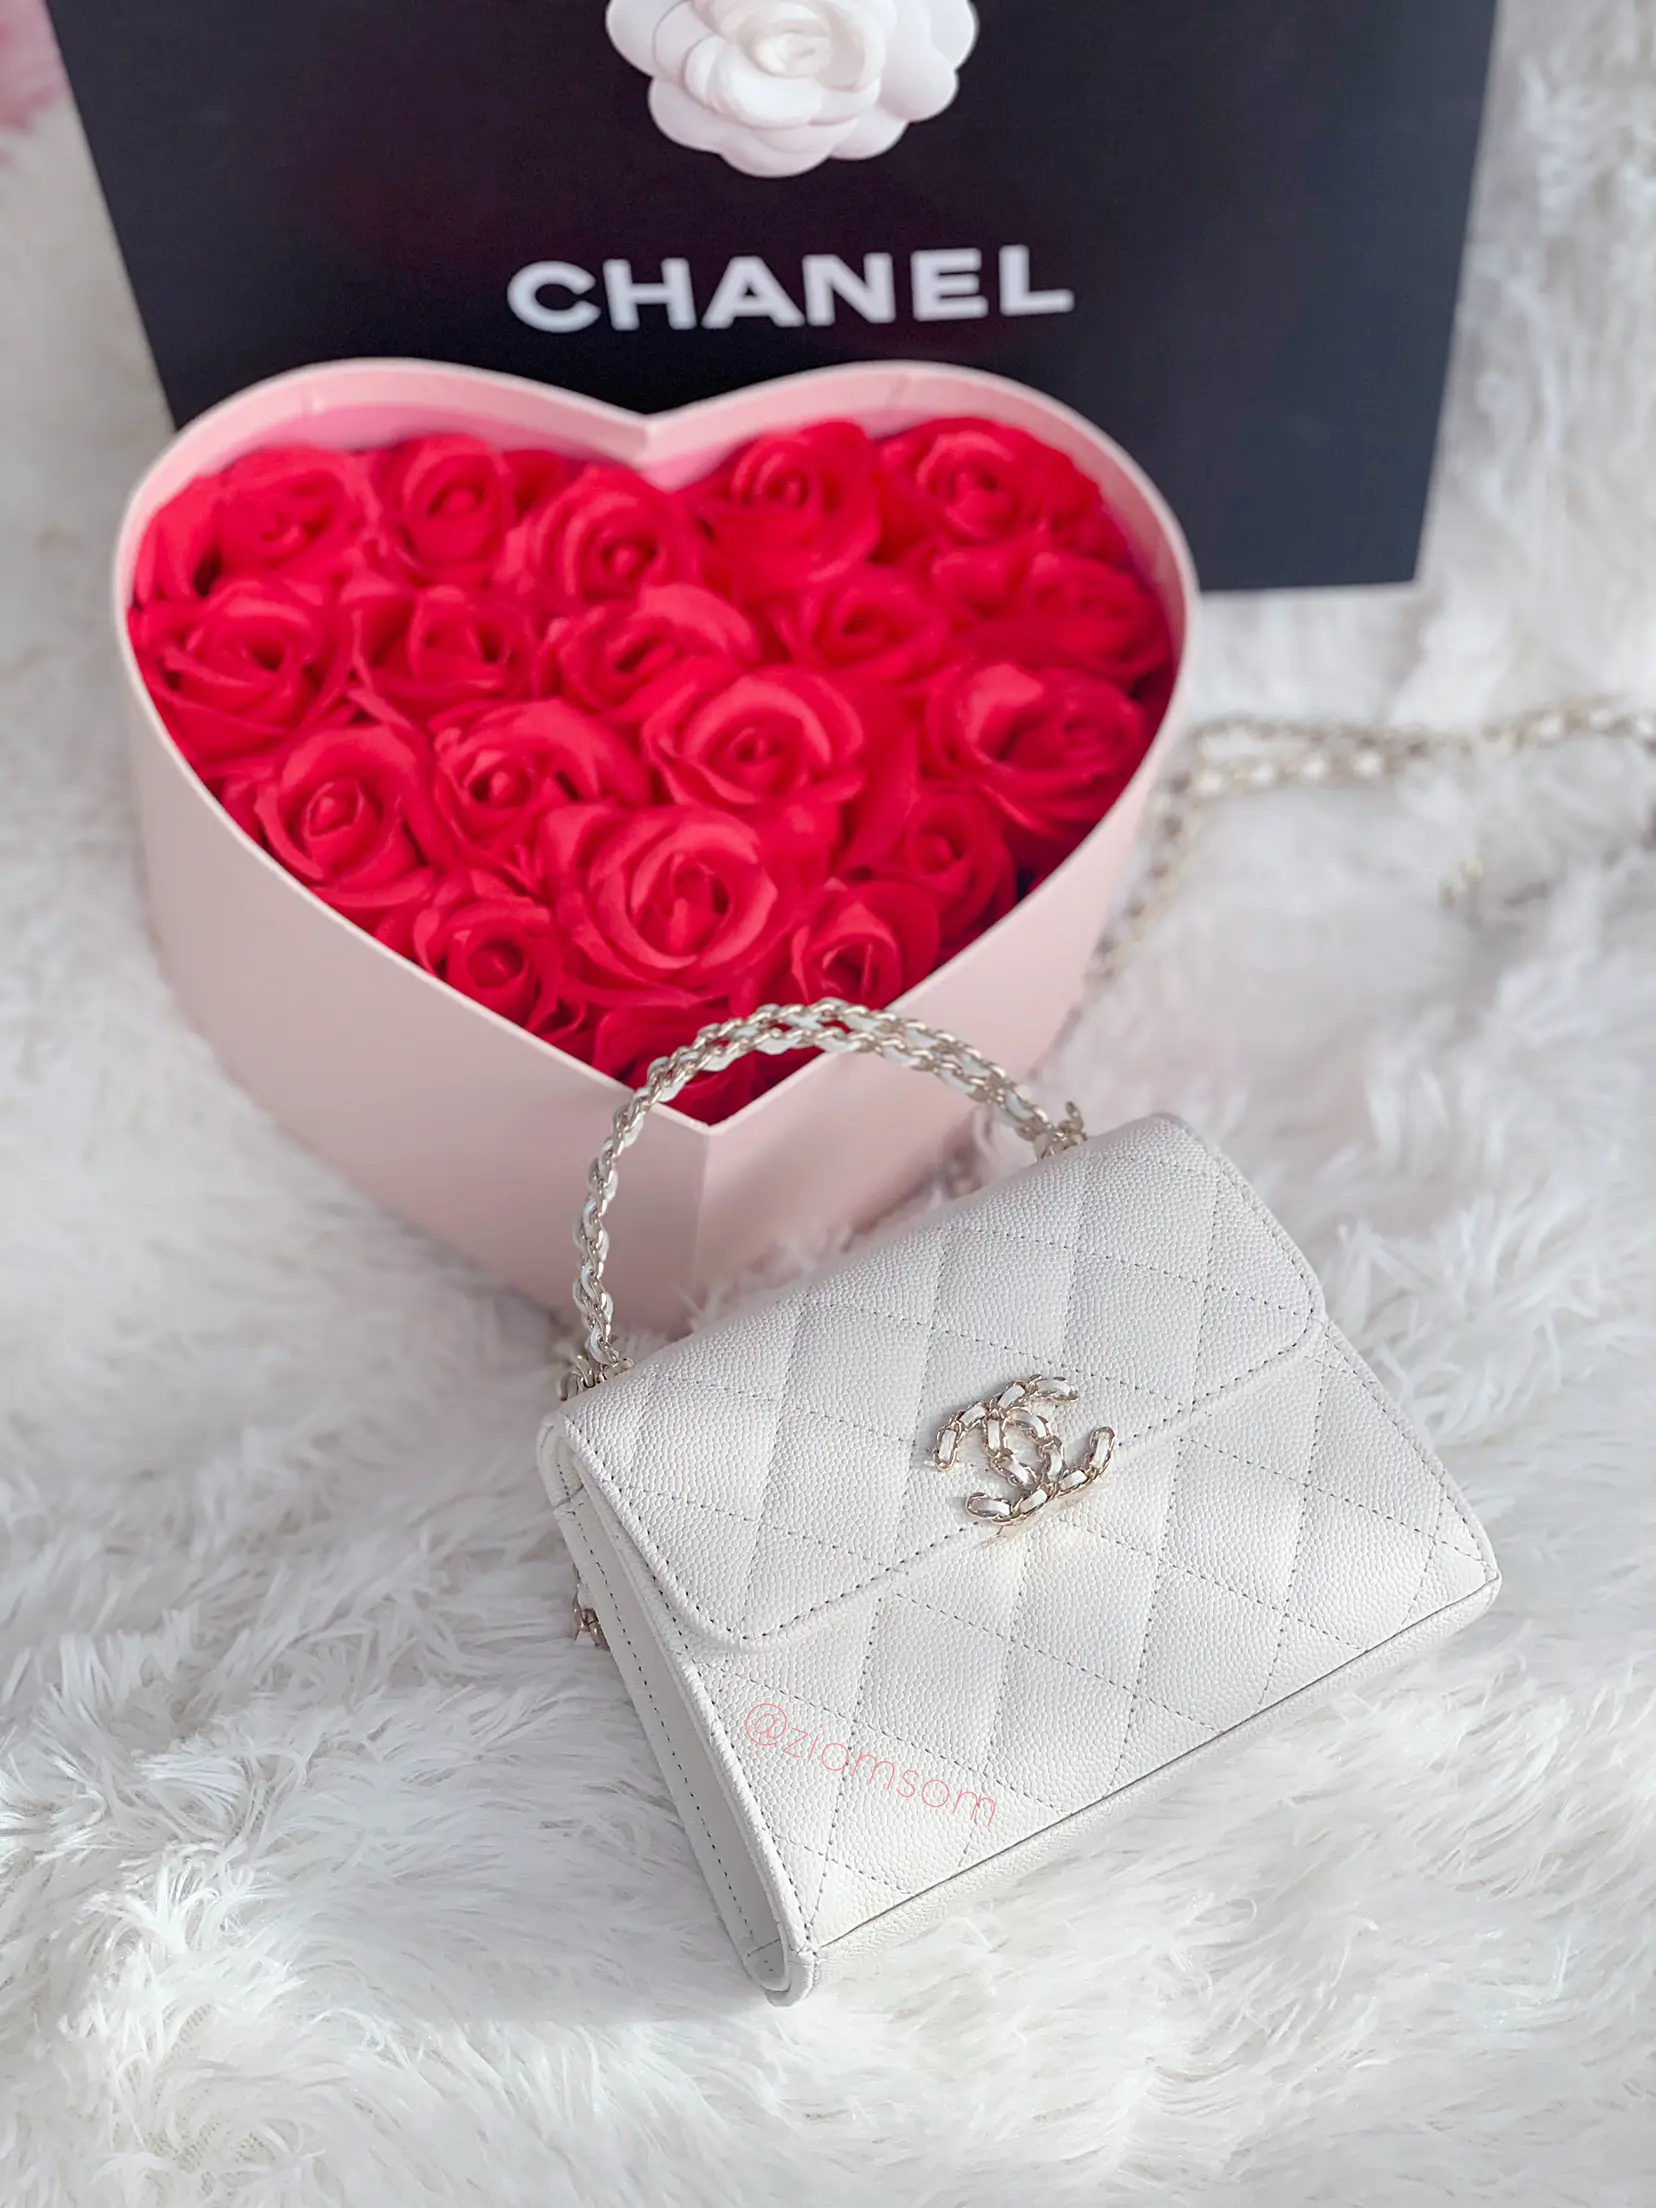 CHANEL MINIMINI RED BAG CHARM NECKLACE #chanel